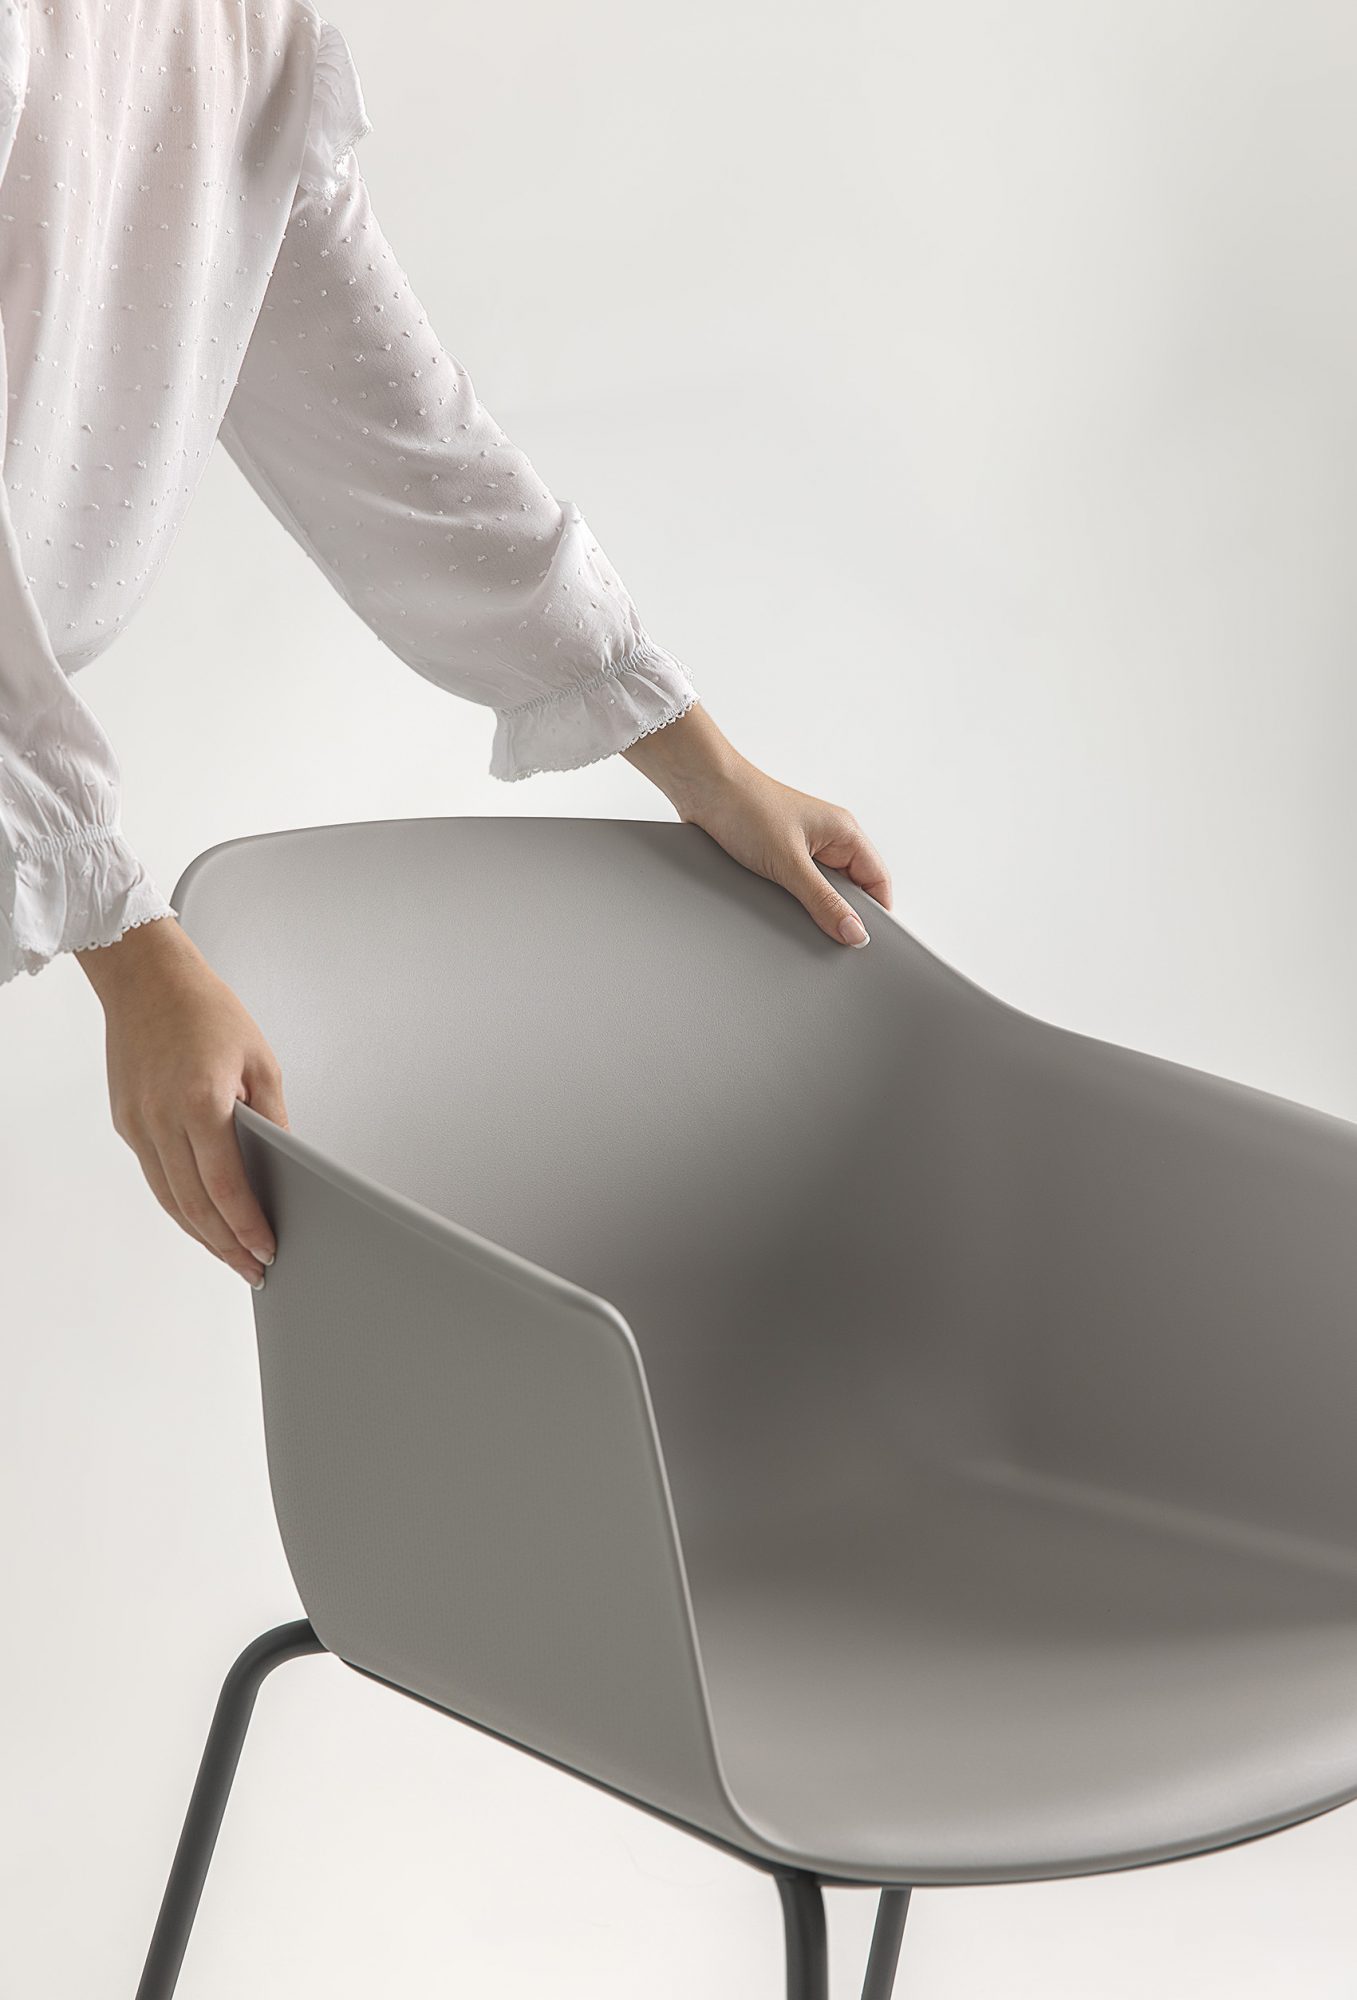 A person adjusting the Noom 60 chair designed by Alegre Design for Actiu. The chair has a smooth, light gray, curved bucket-style seat with integrated armrests and black metal legs. The person is holding the chair from the back and side, highlighting its ergonomic design and ease of handling.